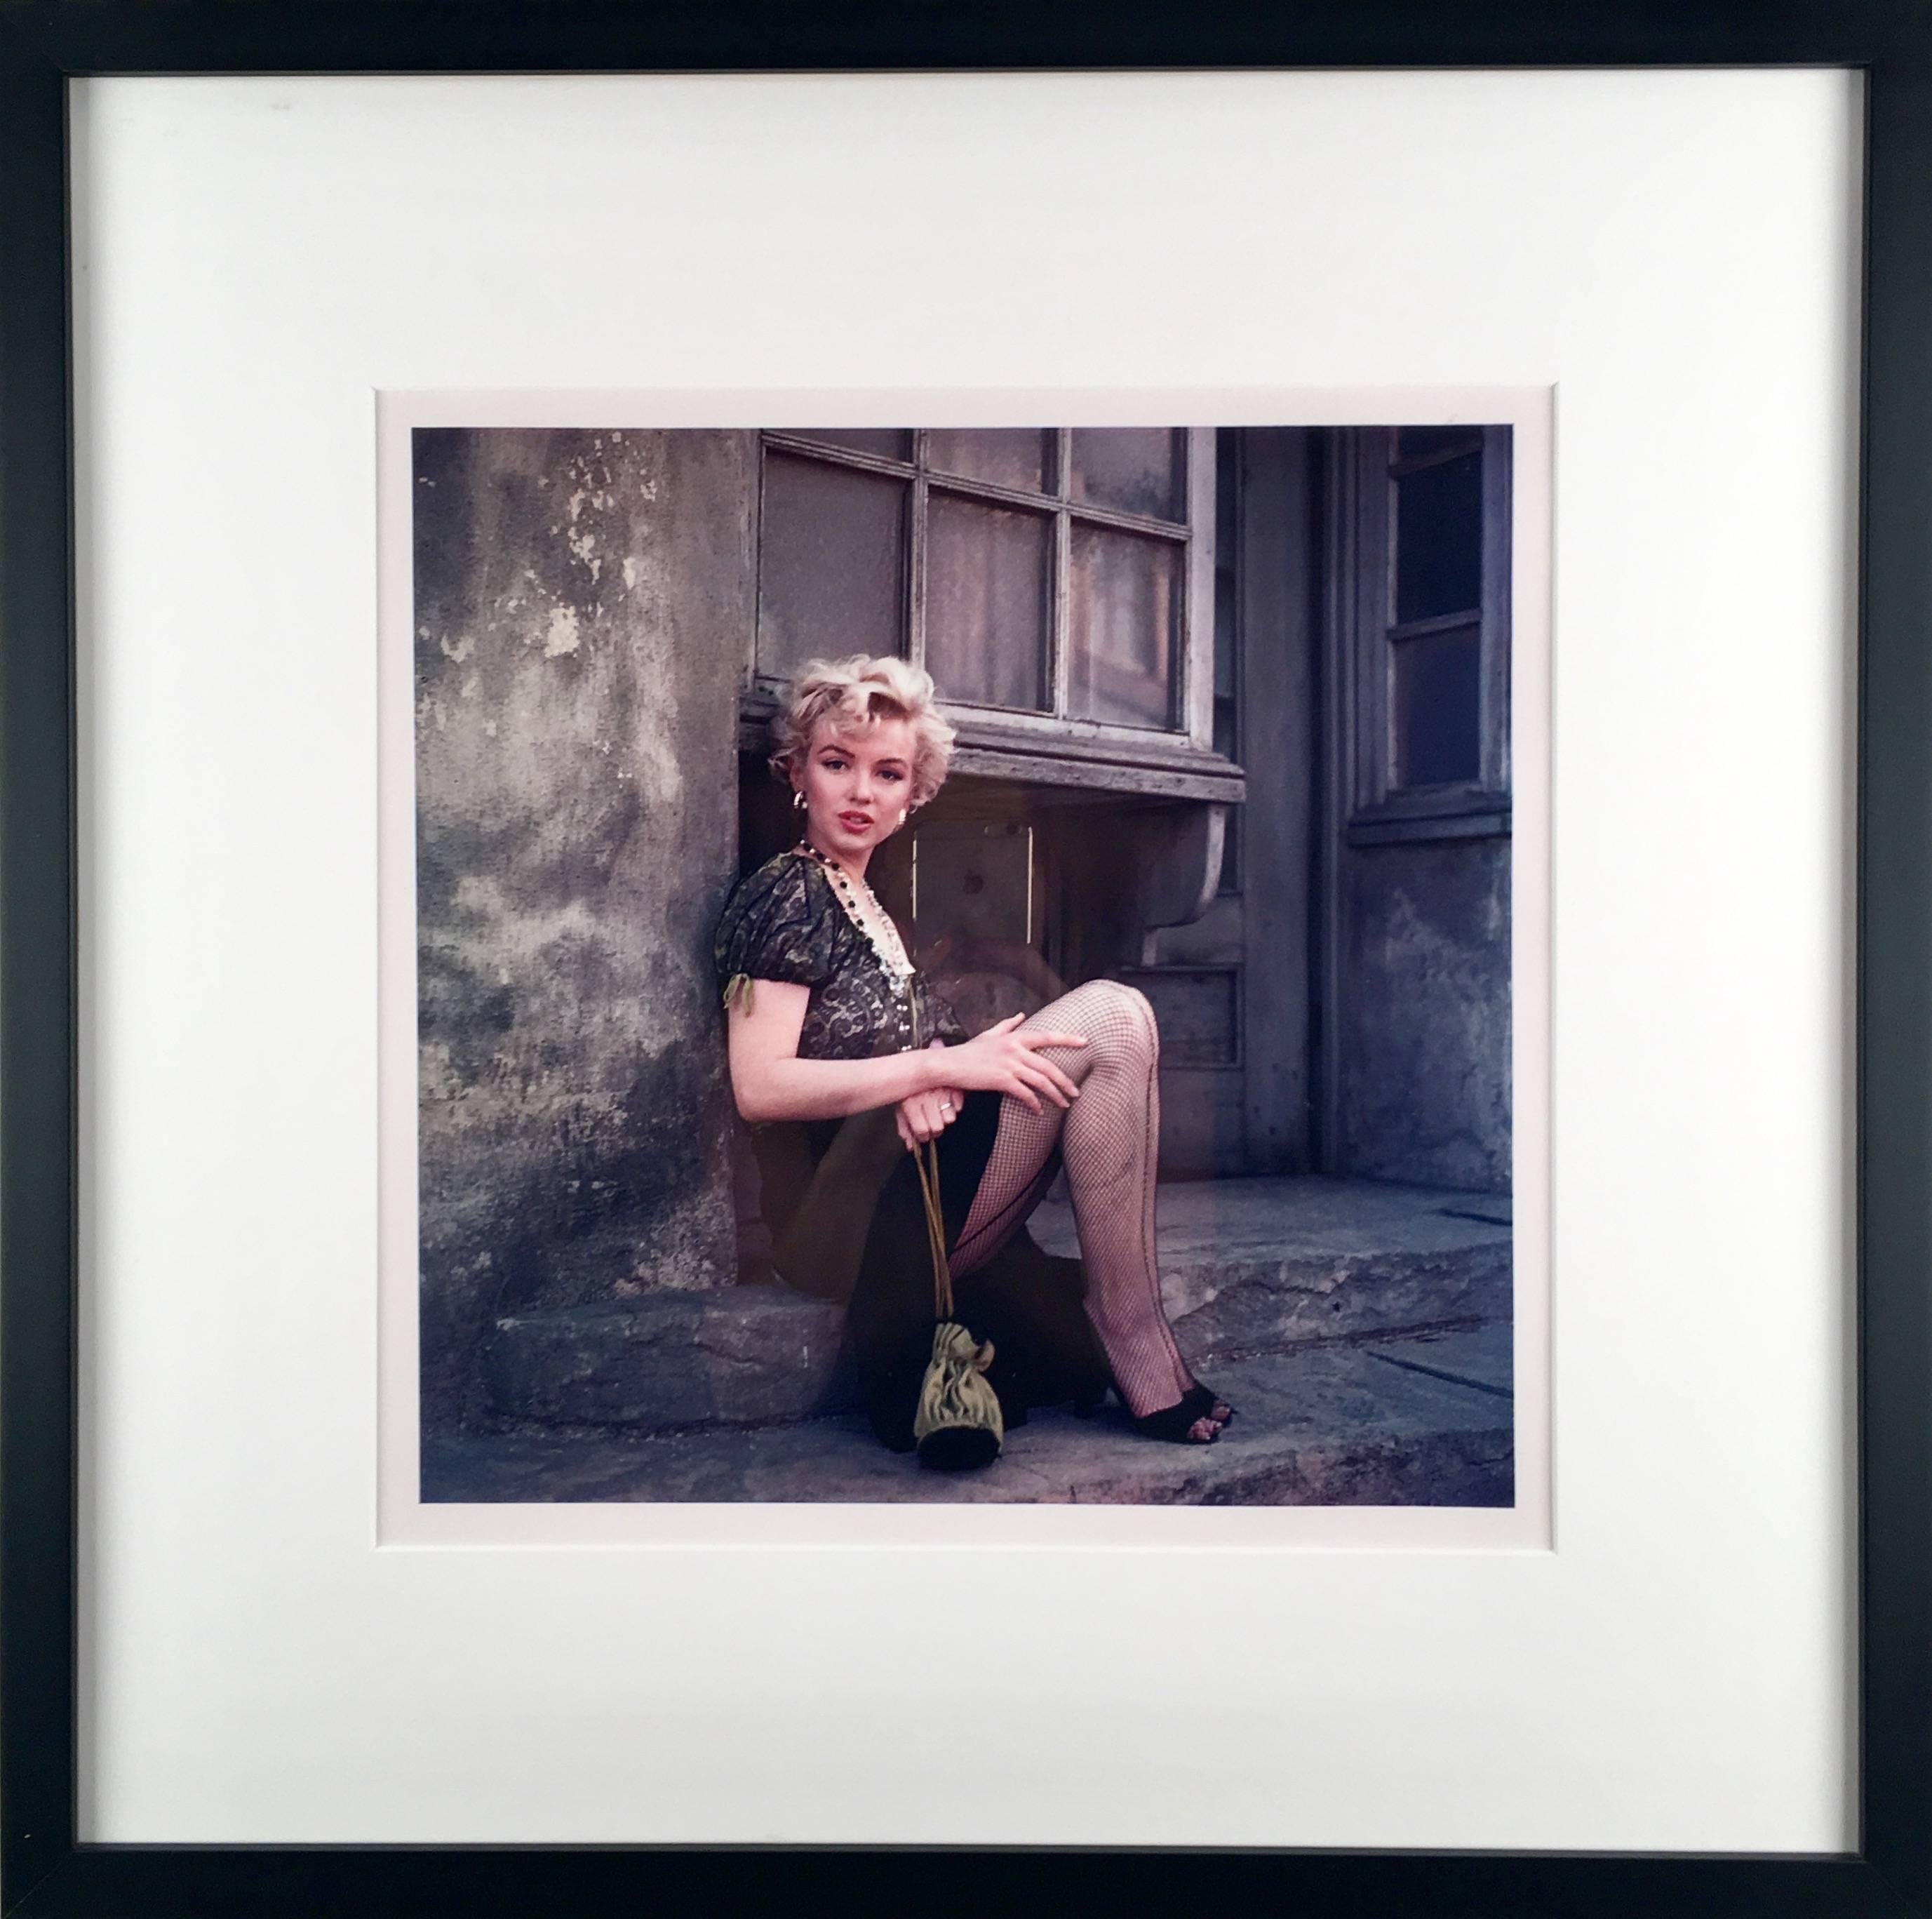 An original modern photograph printed from the original negative taken by Milton Greene in 1956, and printed in 1979.  This image is part of a photo shoot that was done in promotion of Monroe's new film 